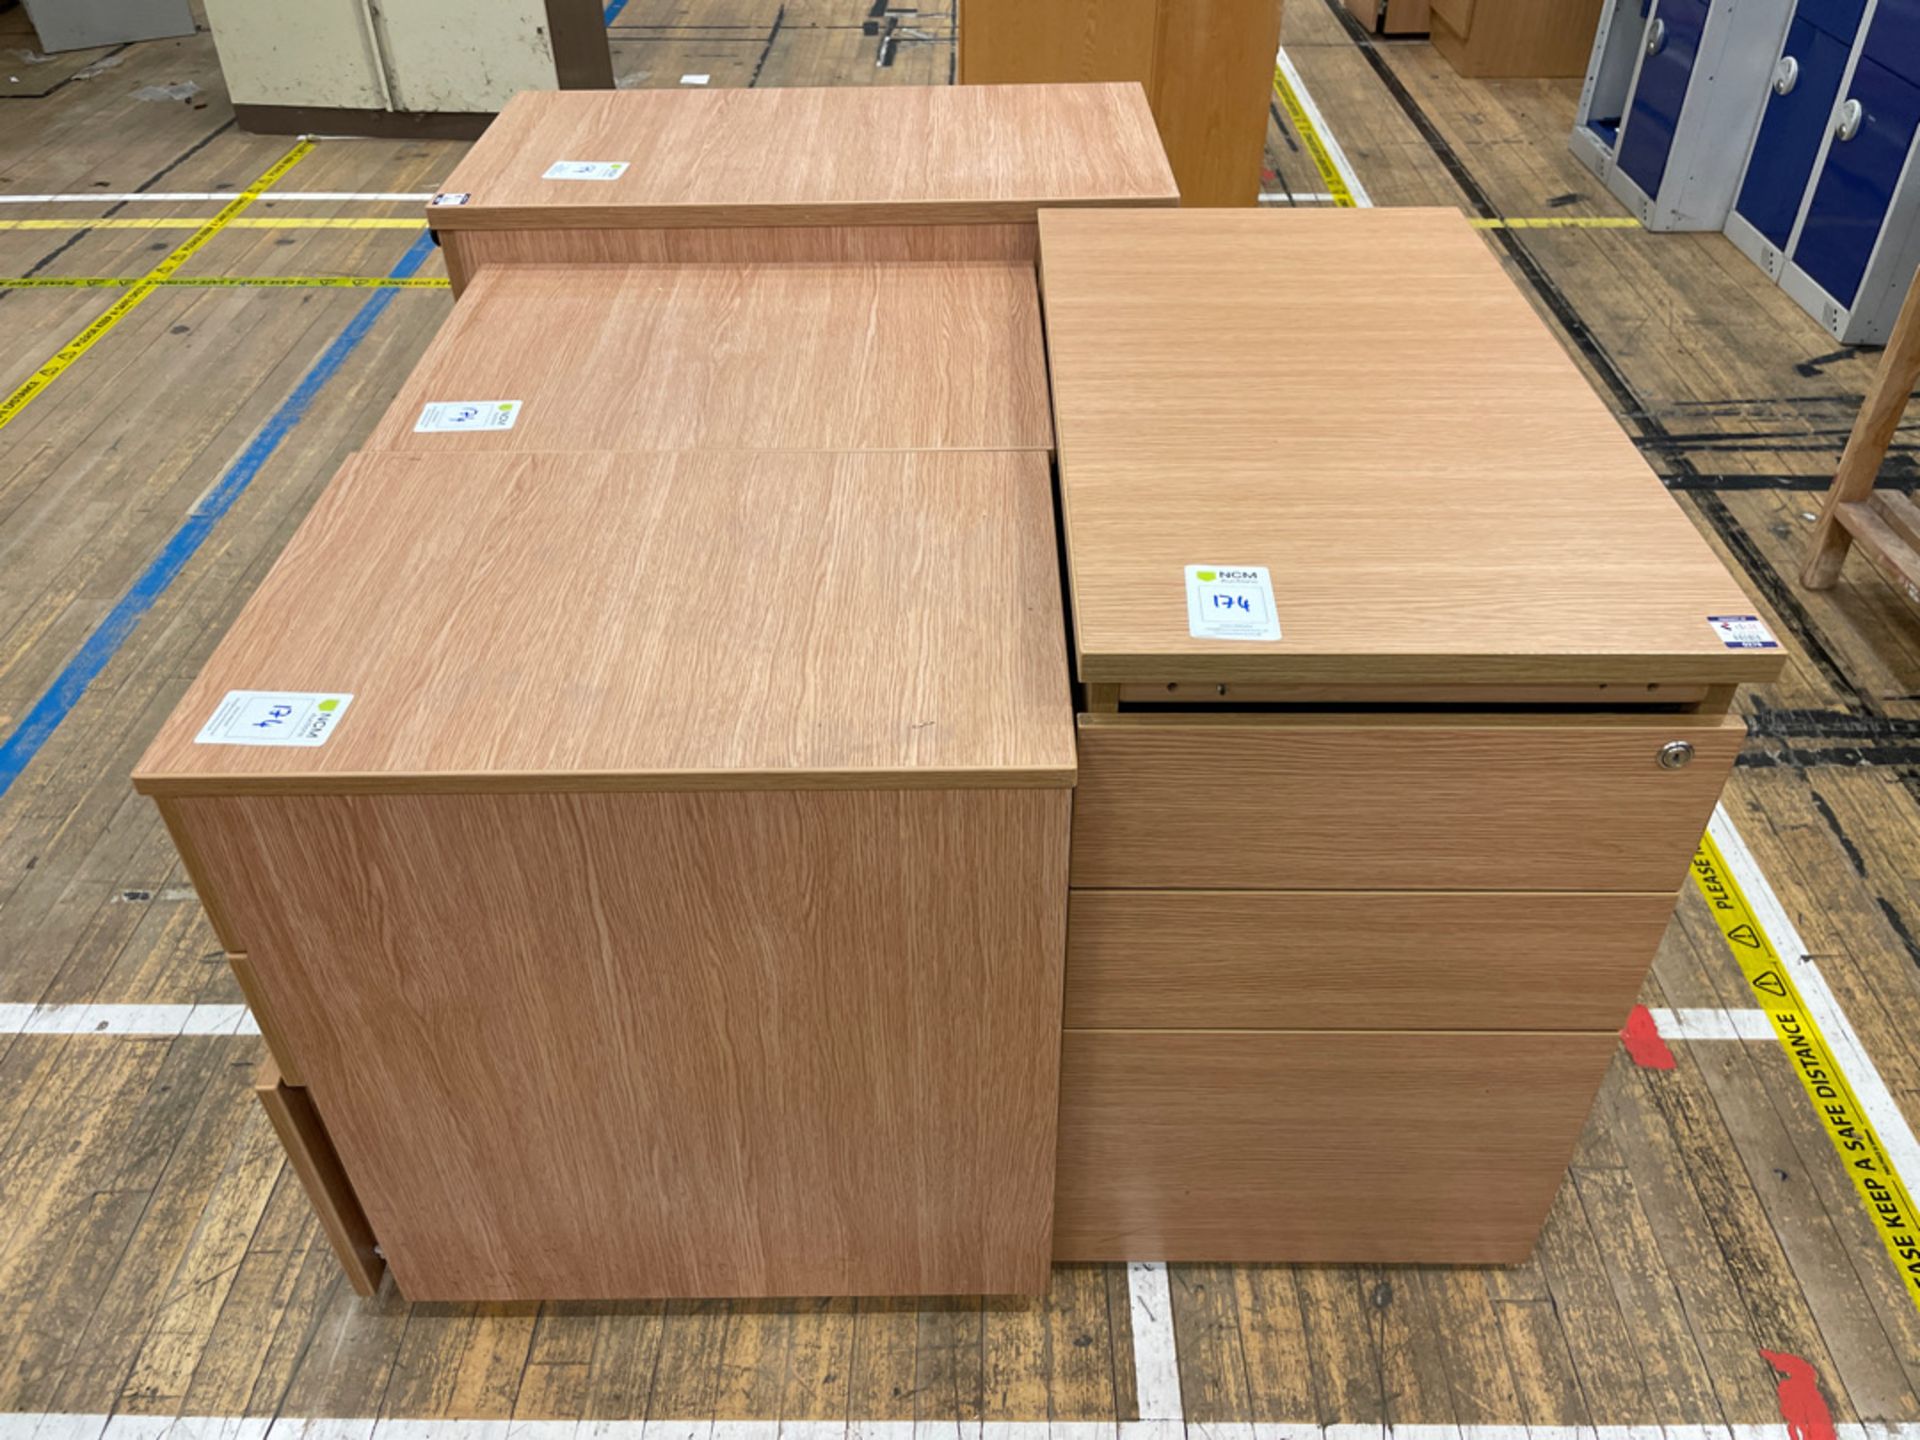 Filing Cabinets x 4, 3 Drawer Wooden - Image 2 of 2